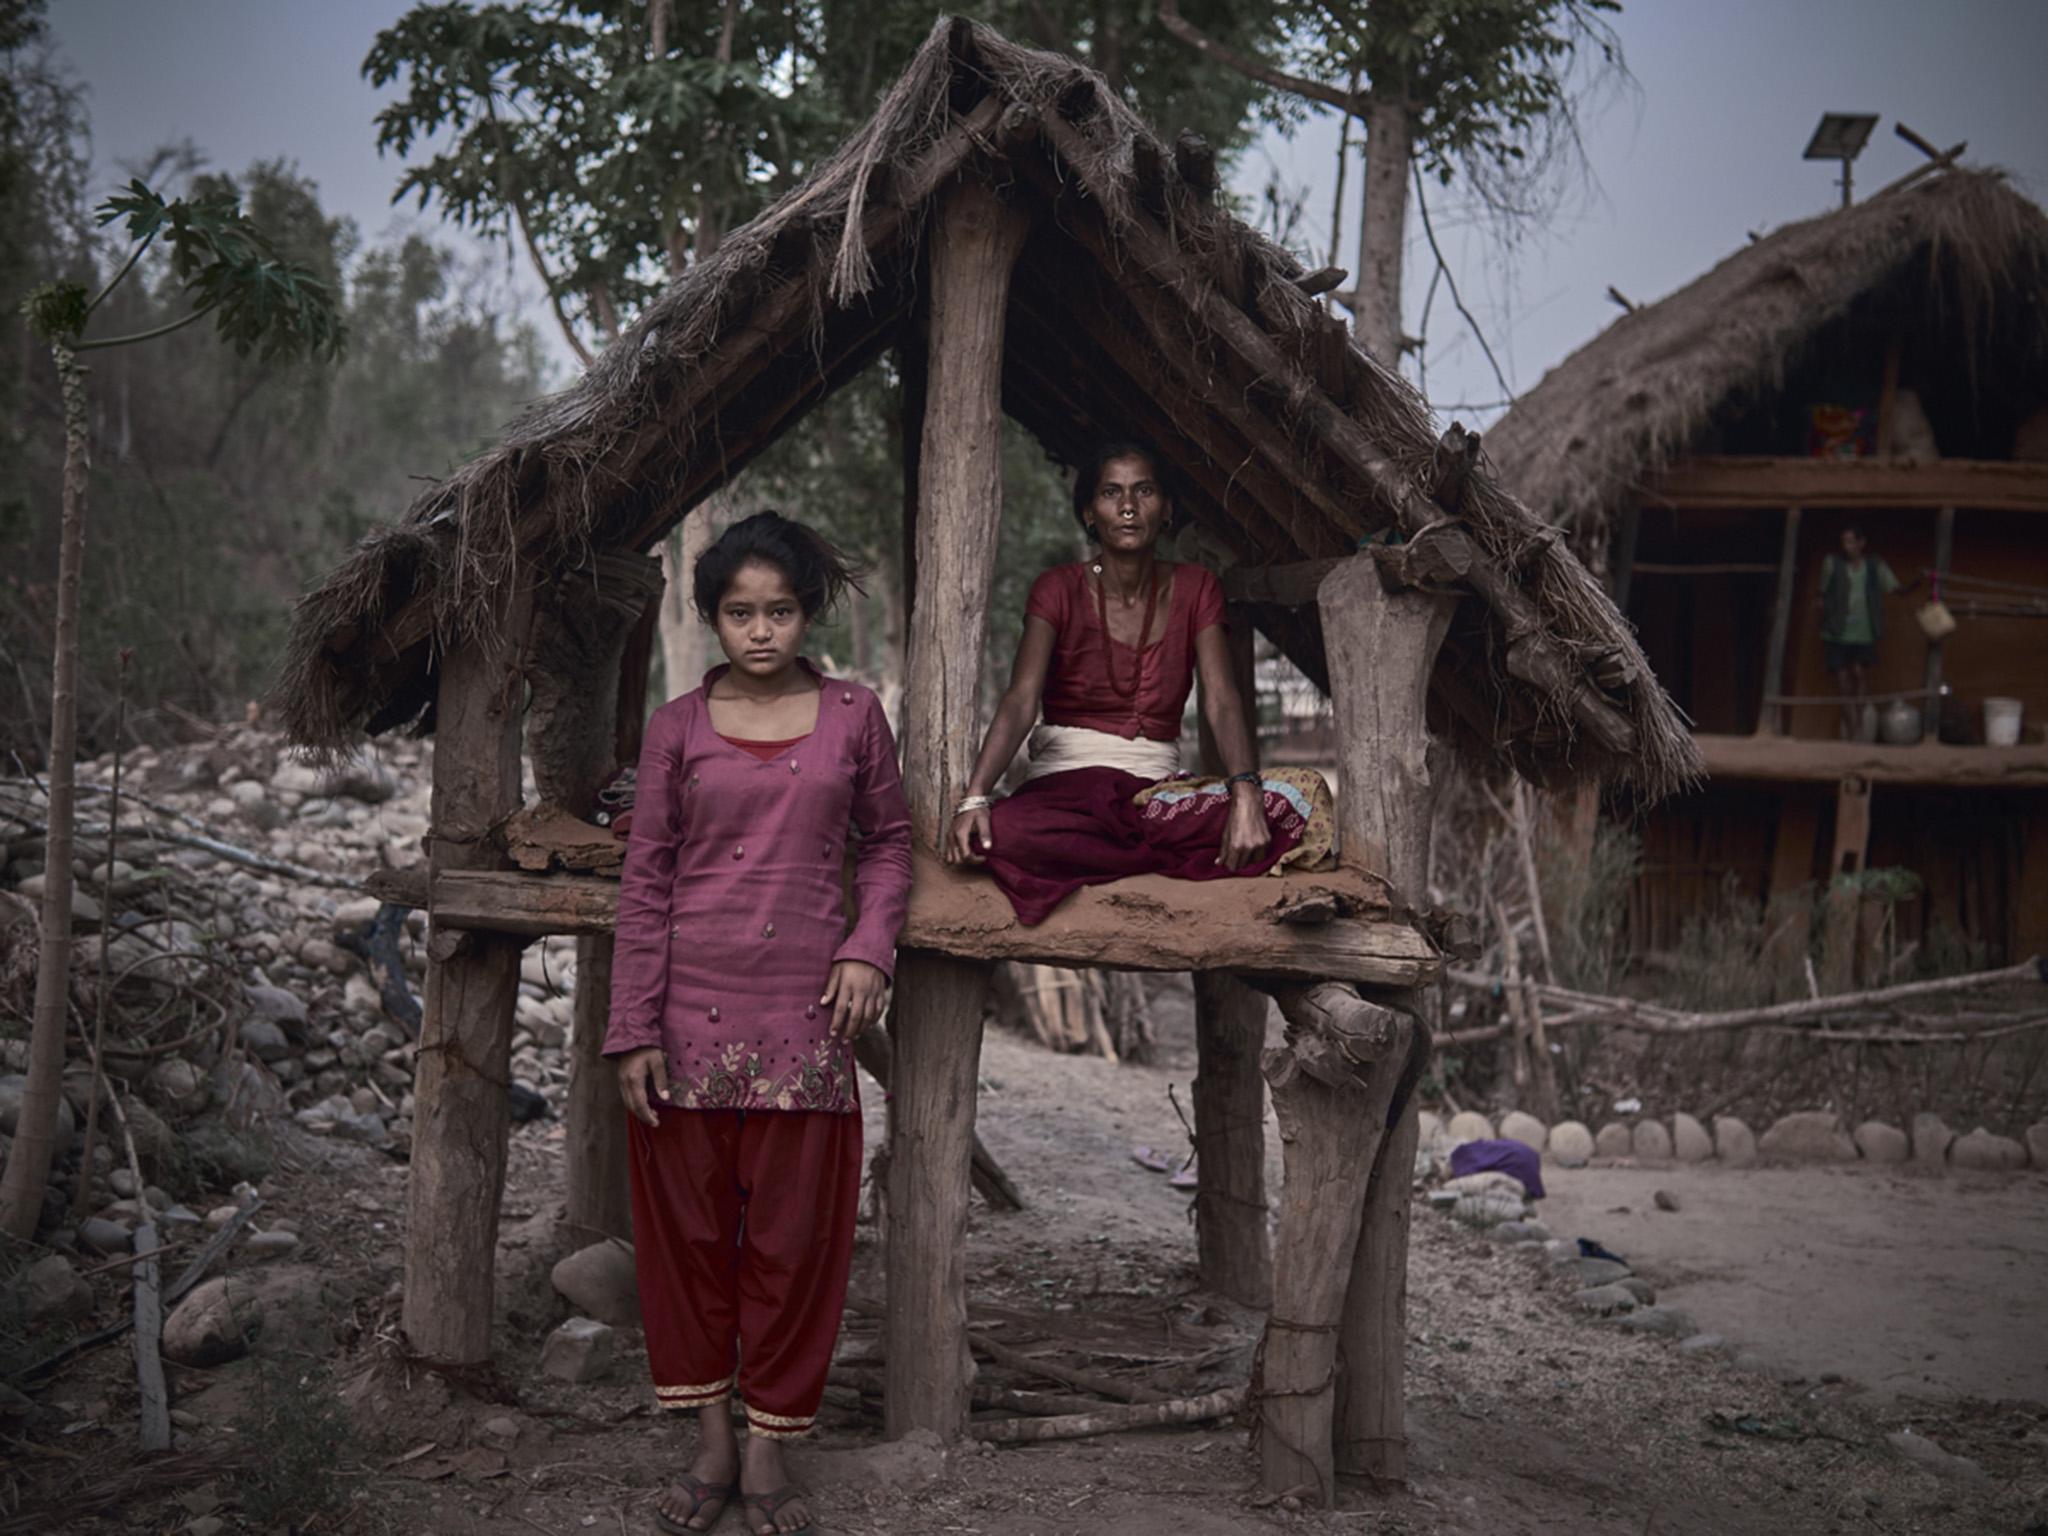 Nepalese women in Surkhet are banished from their homes when they are menstruating. Considered untouchable, they sleep in Chhaupadi, or cow sheds